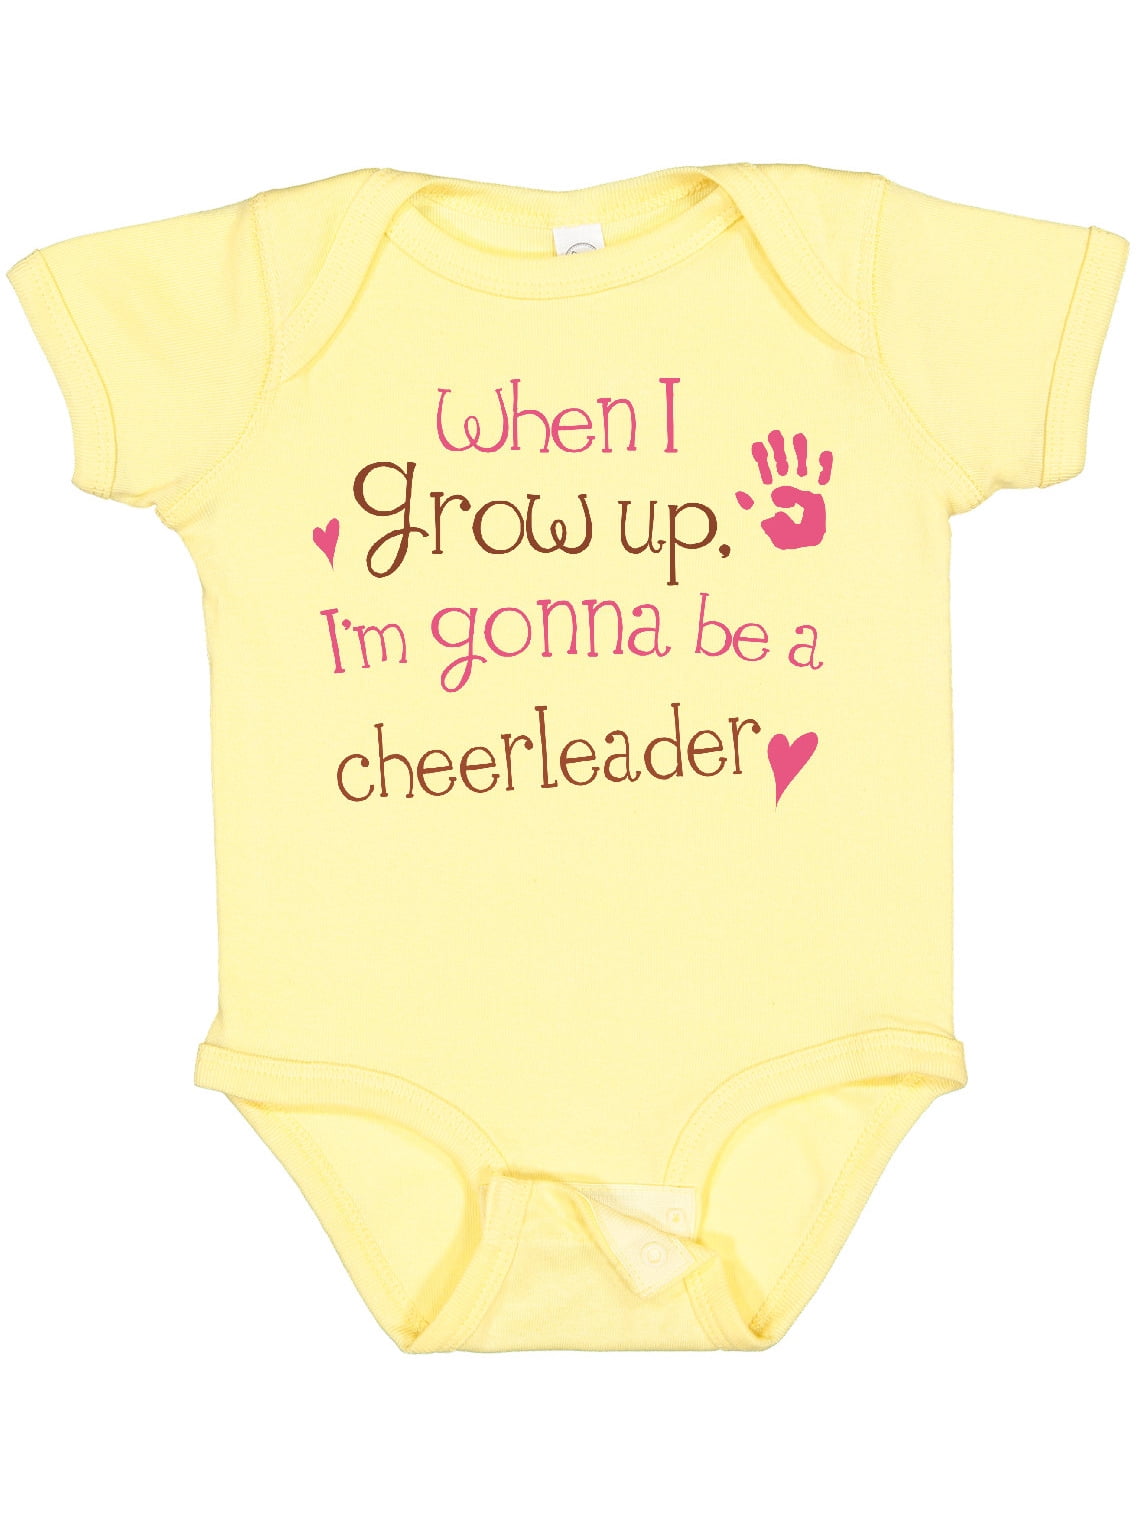 NEW Baby Girls 3-6 Months Bodysuit Creeper Outfit Infant One Piece Cheerleader 